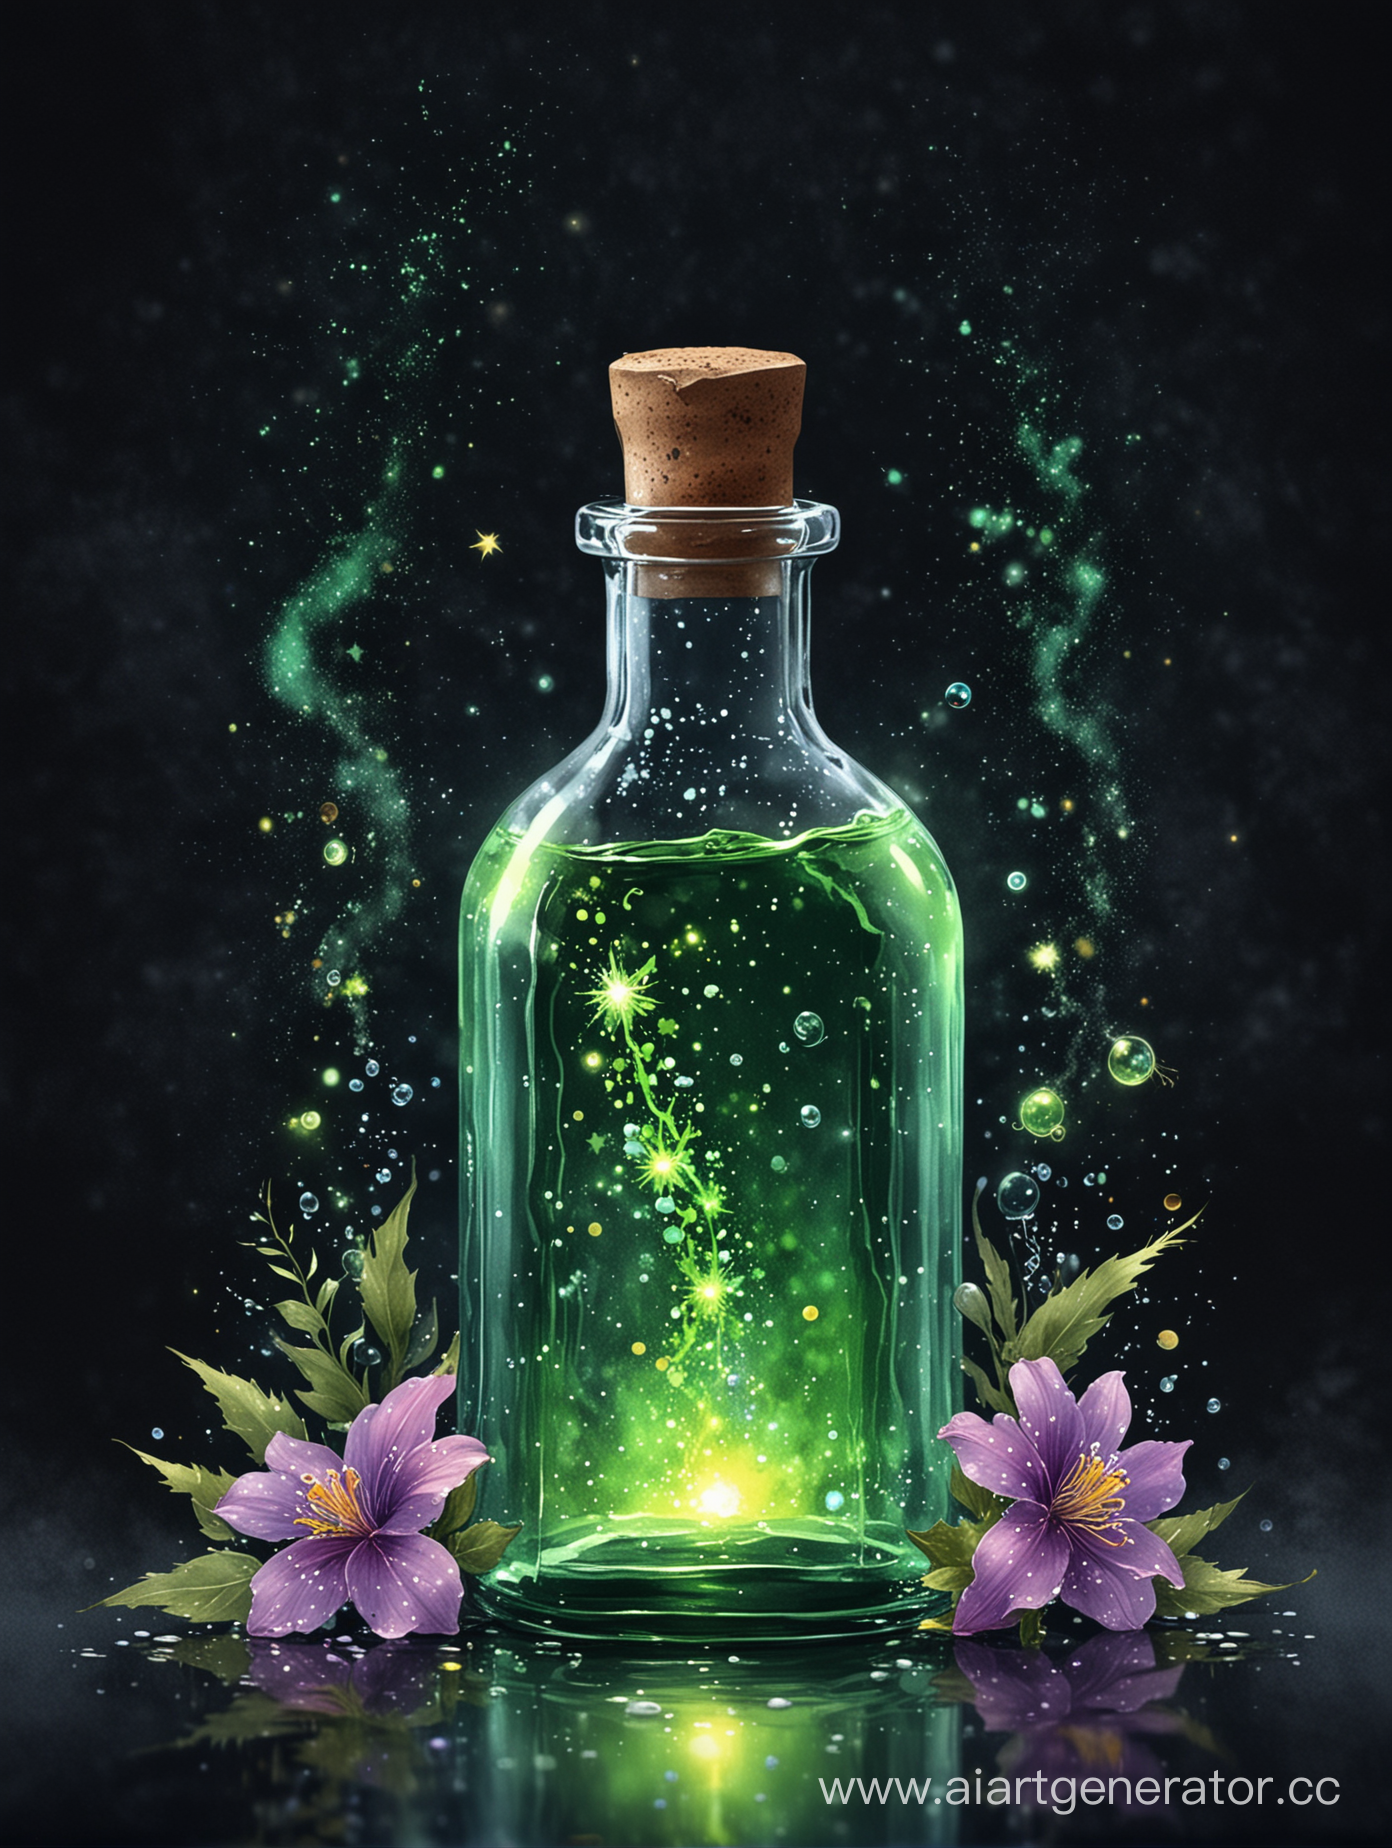 potion bottle, glowing greenliquid, bubbles, sequins, sparks of magic, flowers around the bottle, on a dark background, stars, watercolor, 4k